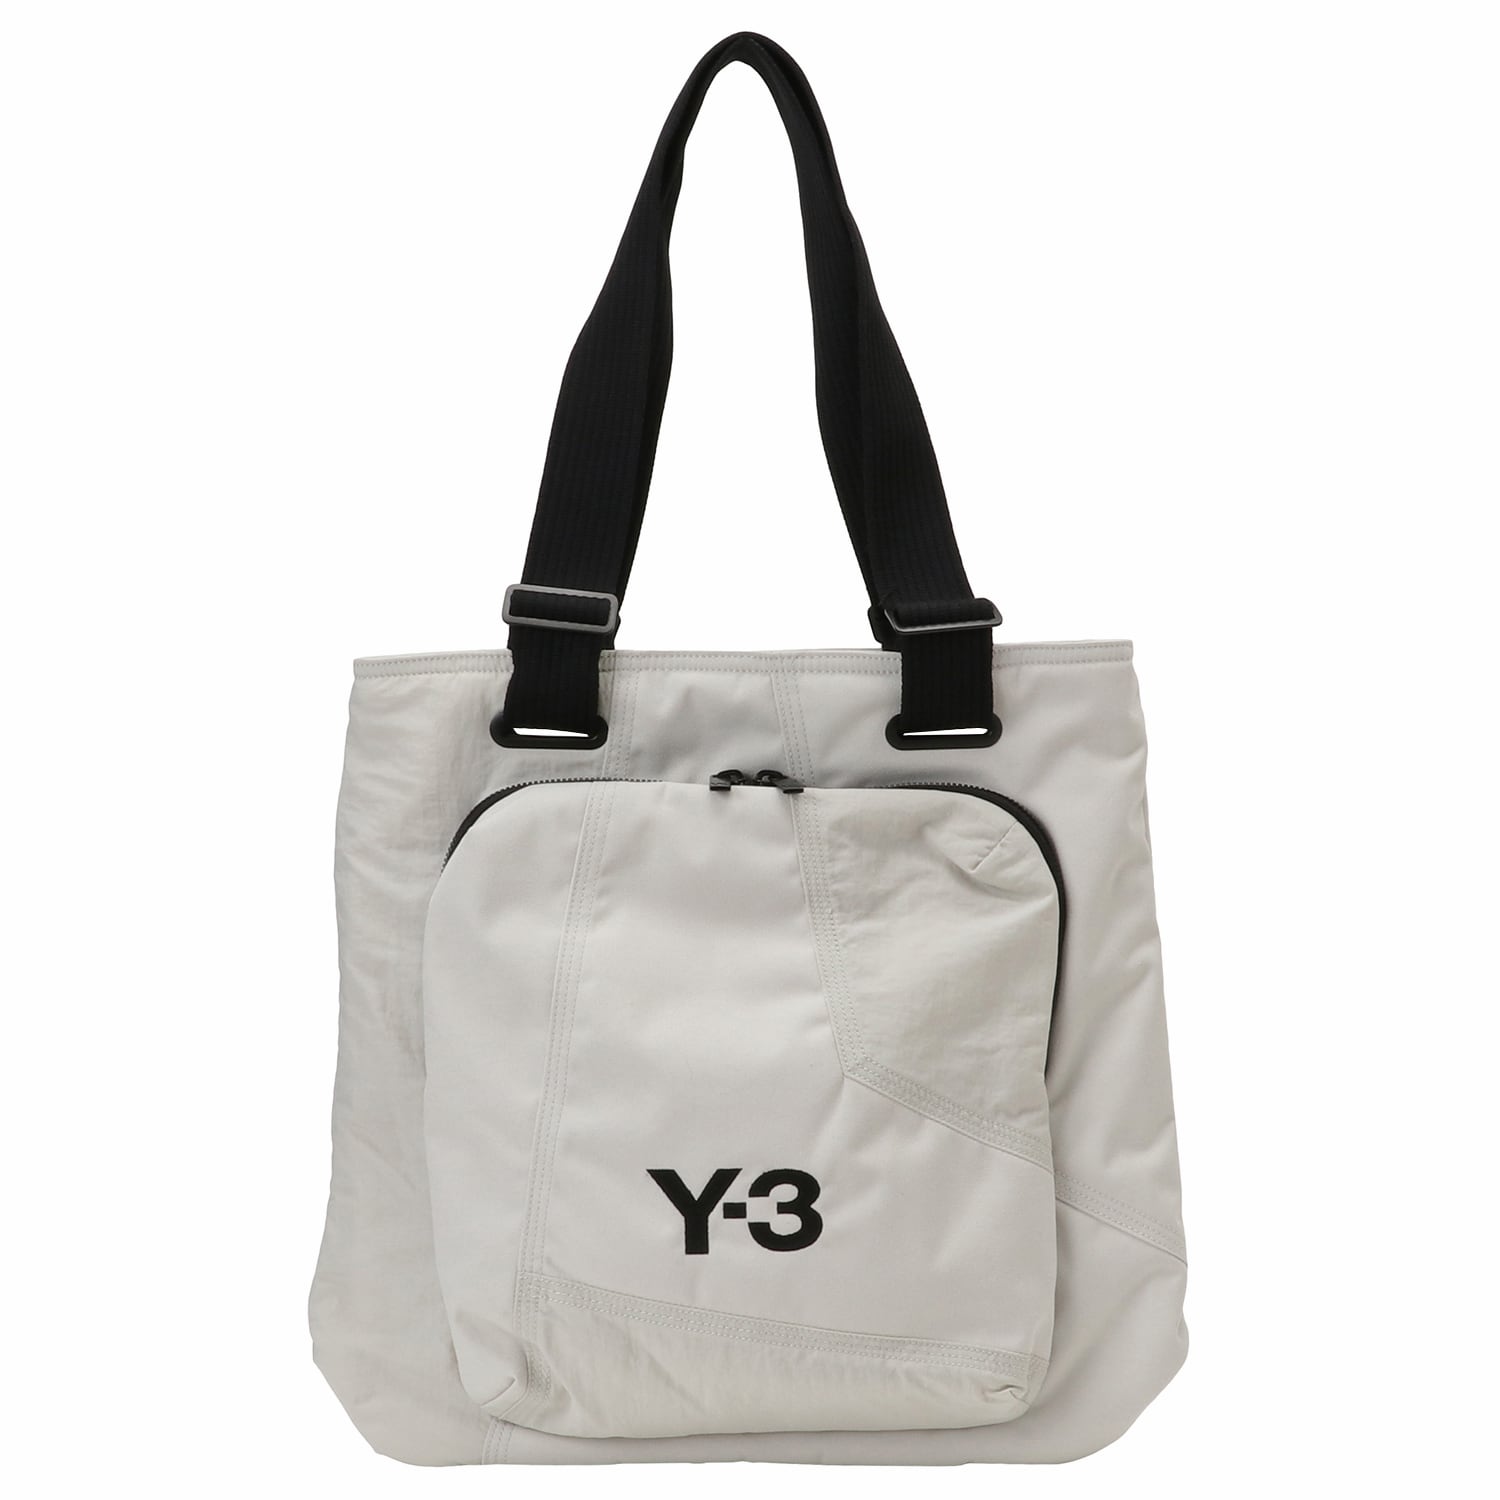 Y-3 ワイスリー CLASSIC TOTE/トートバッグ 手提げ-eastgate.mk